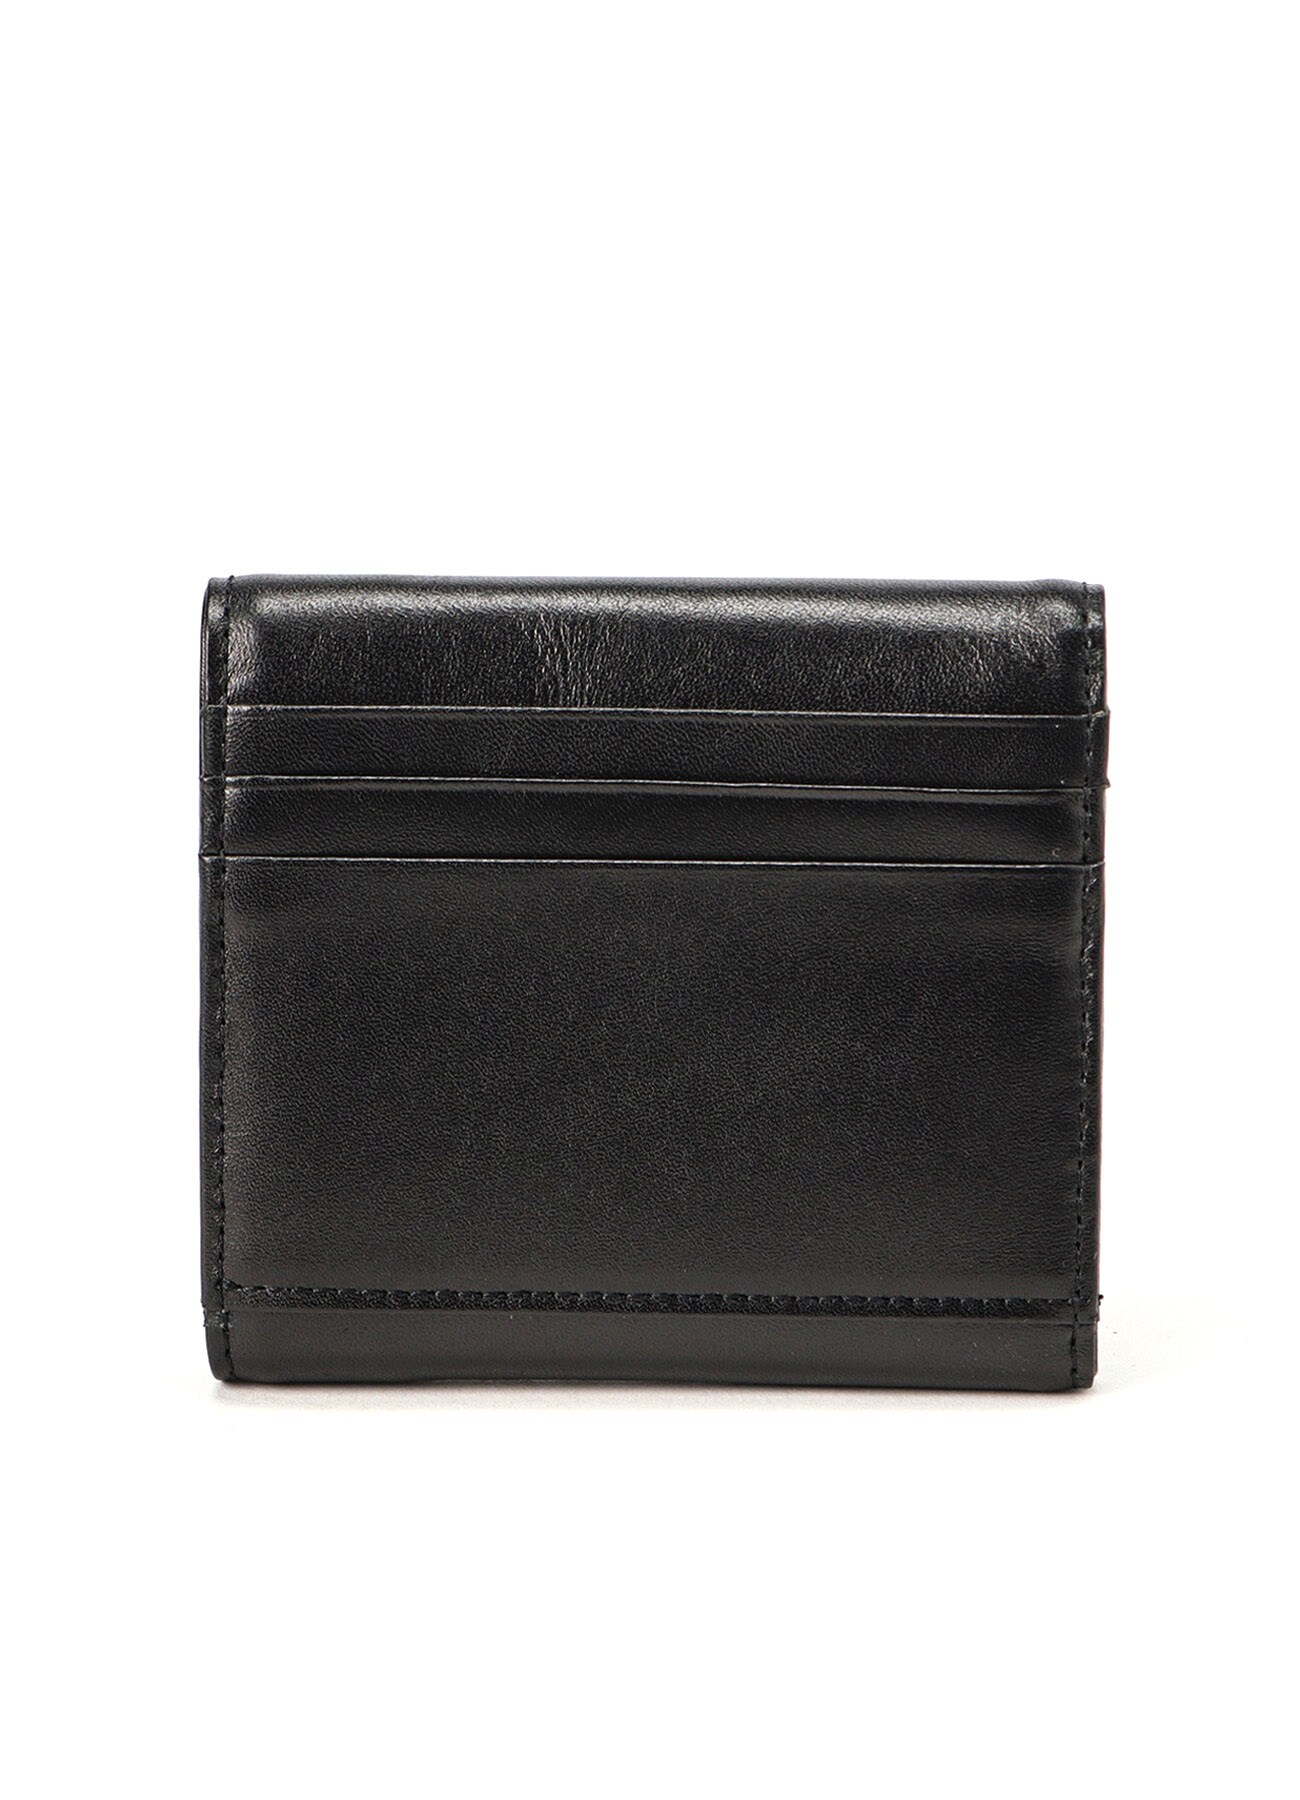 【7/26 12:00 Release】SEMI-GLOSS SMOOTH LEATHER MINI FOLDING WALLET